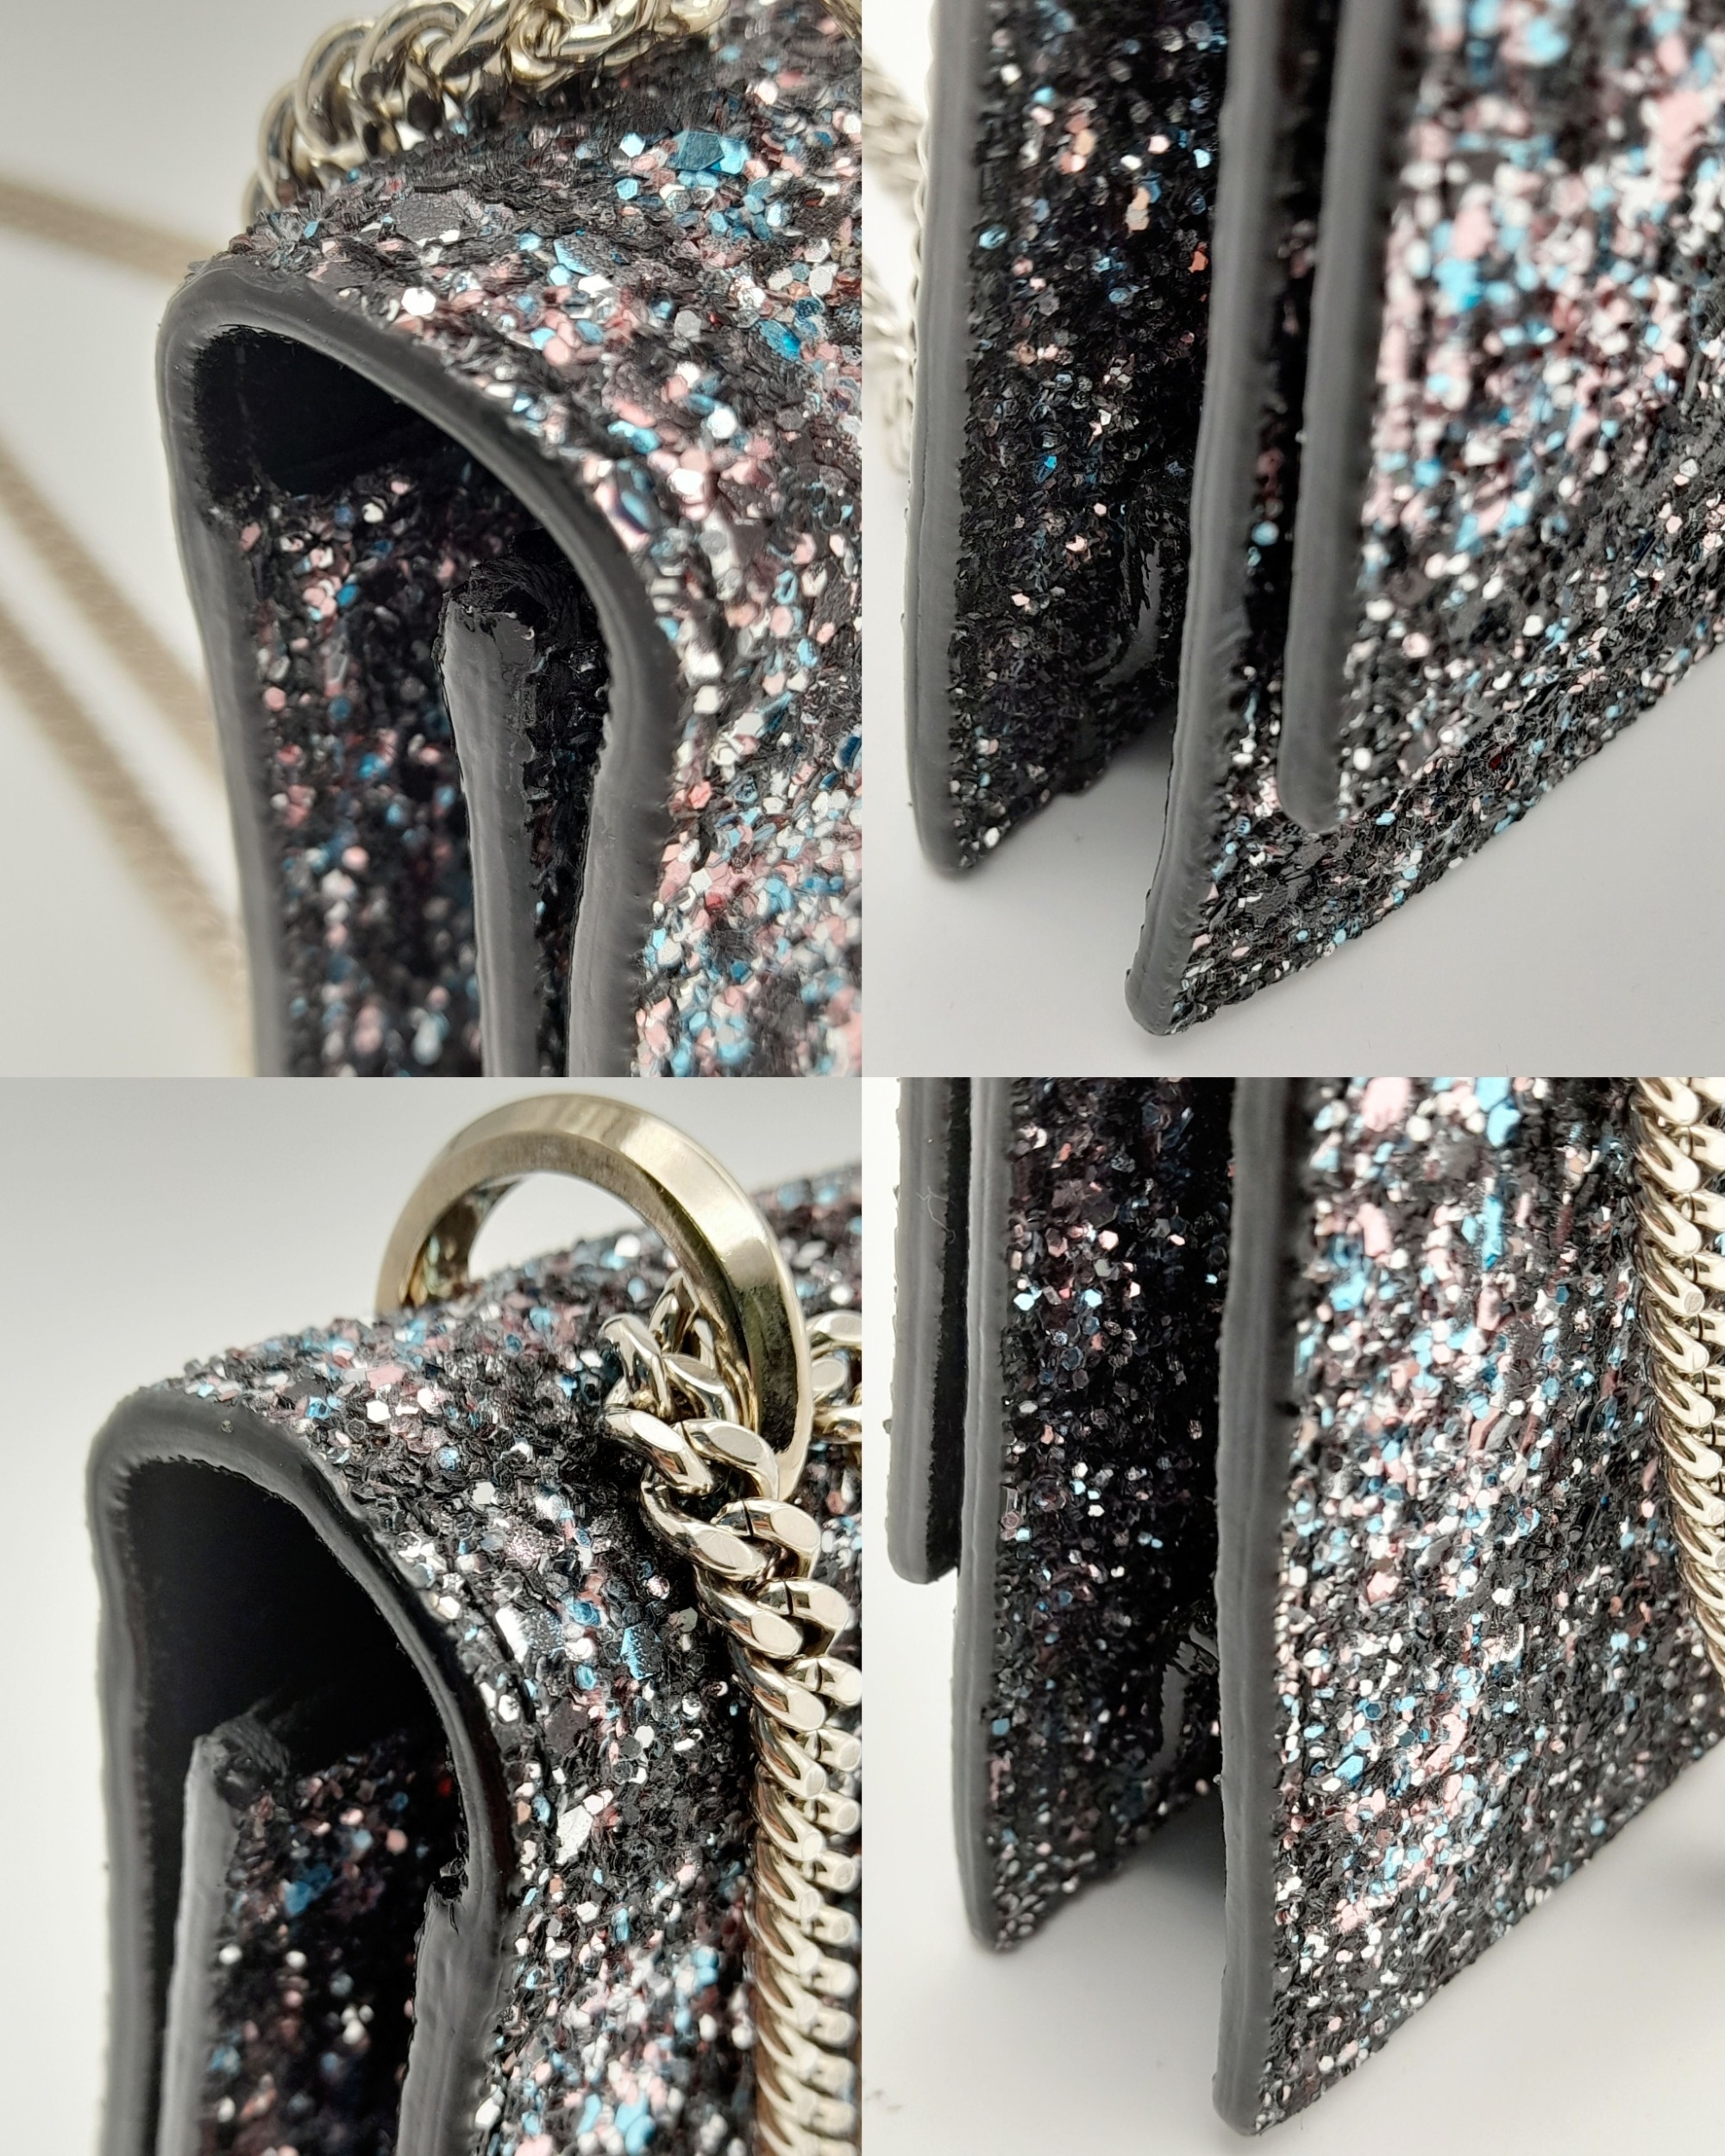 A Jimmy Choo 'Leni' Glitter Crossbody Bag. Black leather and blue, pink and black glitter exterior - Image 4 of 9